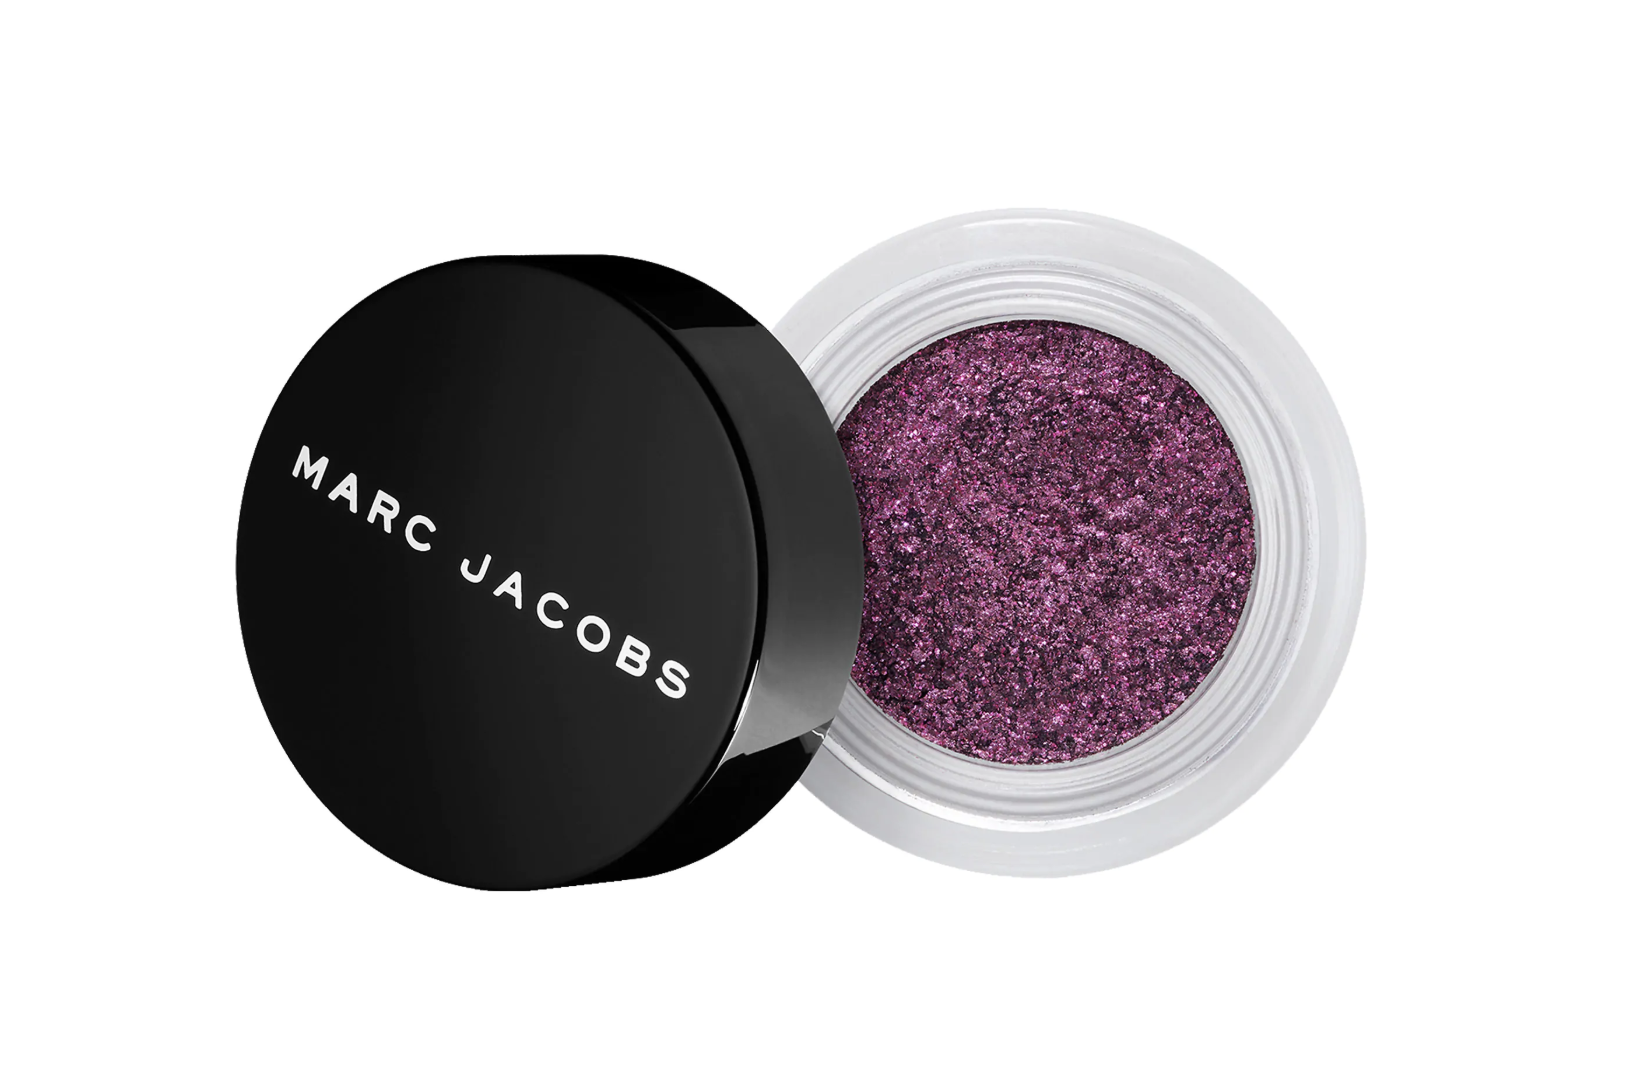 Marc Jacobs See-quins Glam Glitter Eyeshadow